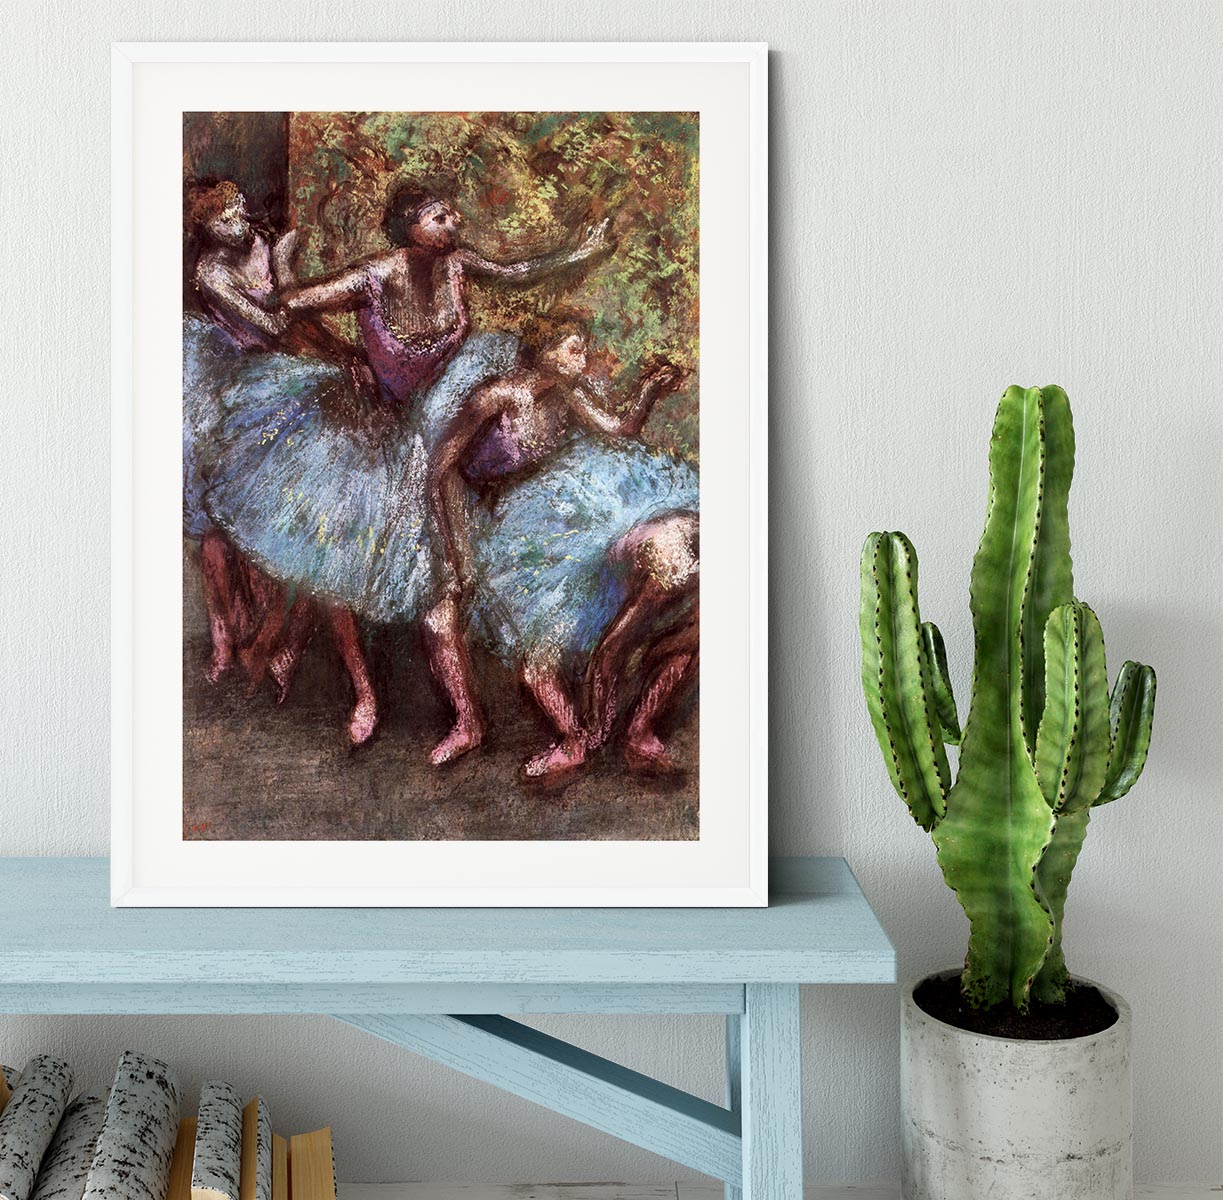 Four dancers behind the scenes 1 by Degas Framed Print - Canvas Art Rocks - 5